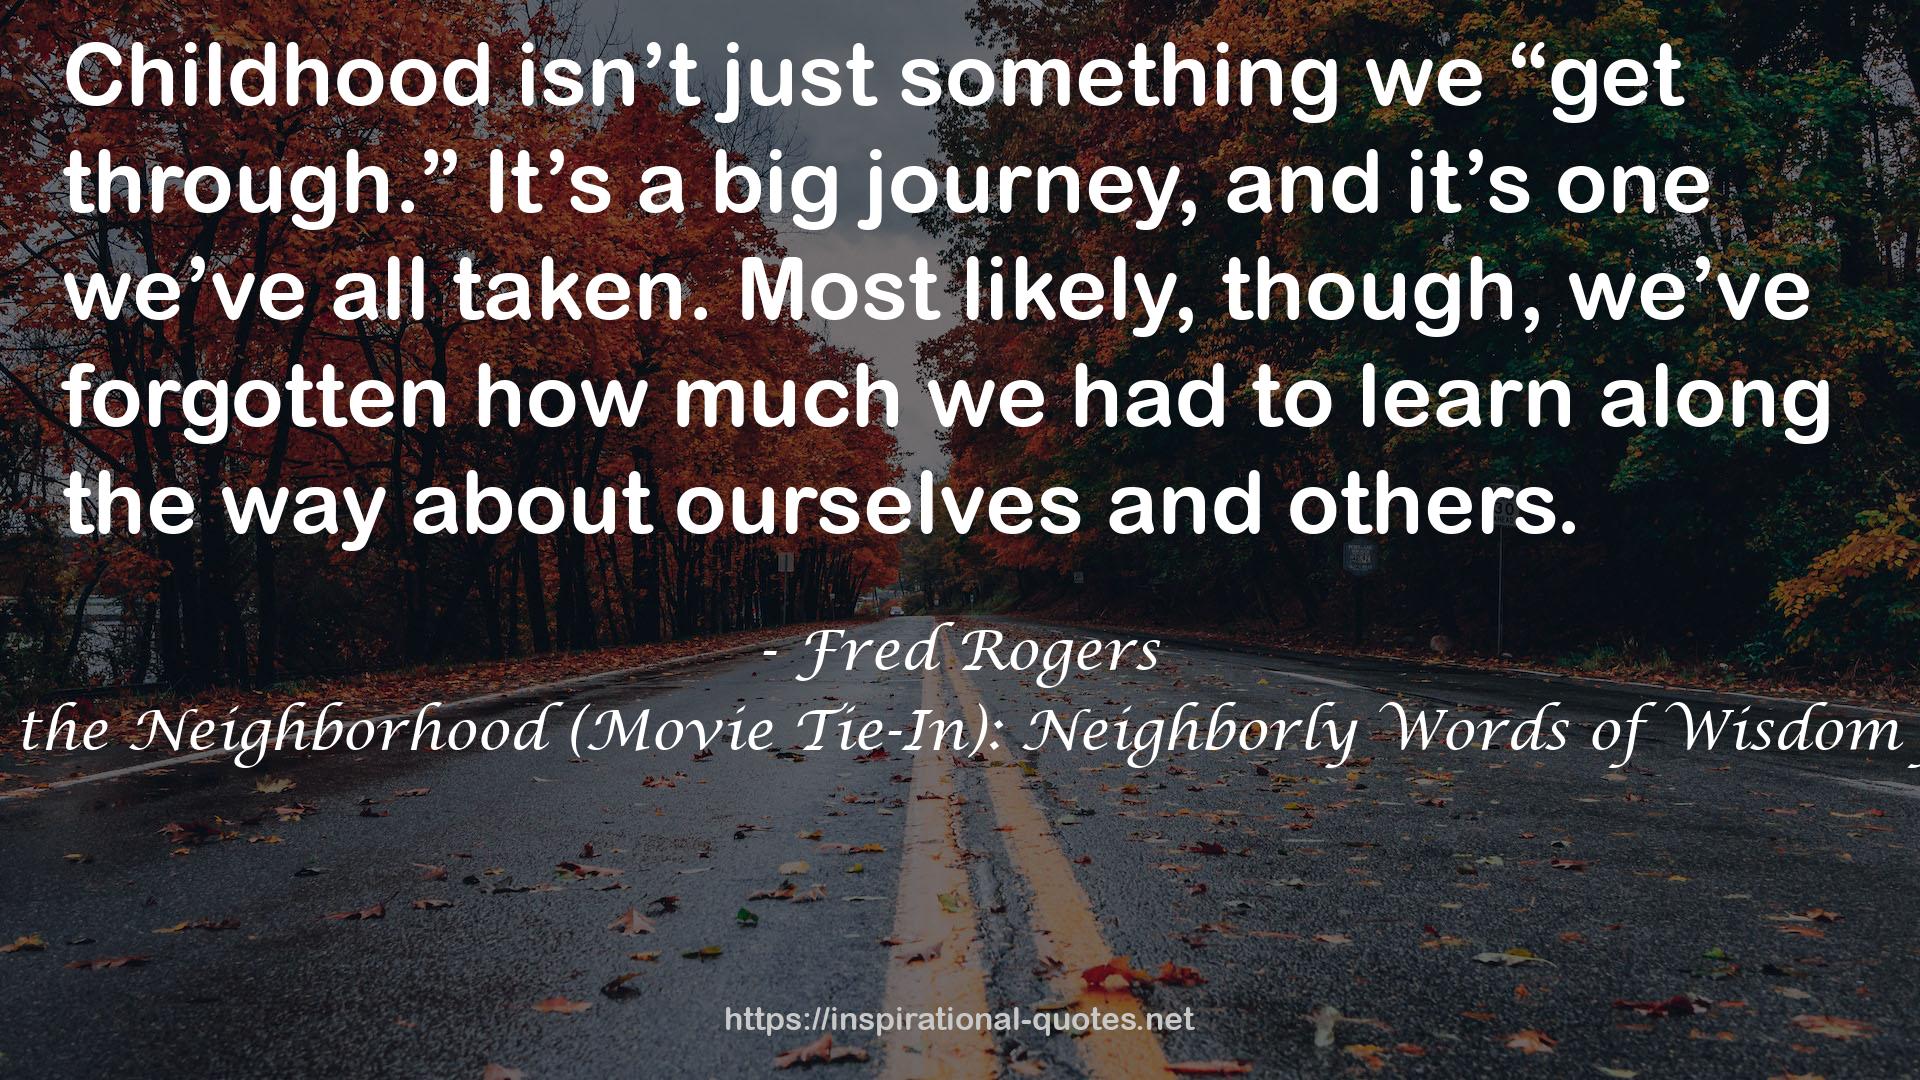 A Beautiful Day in the Neighborhood (Movie Tie-In): Neighborly Words of Wisdom from Mister Rogers QUOTES